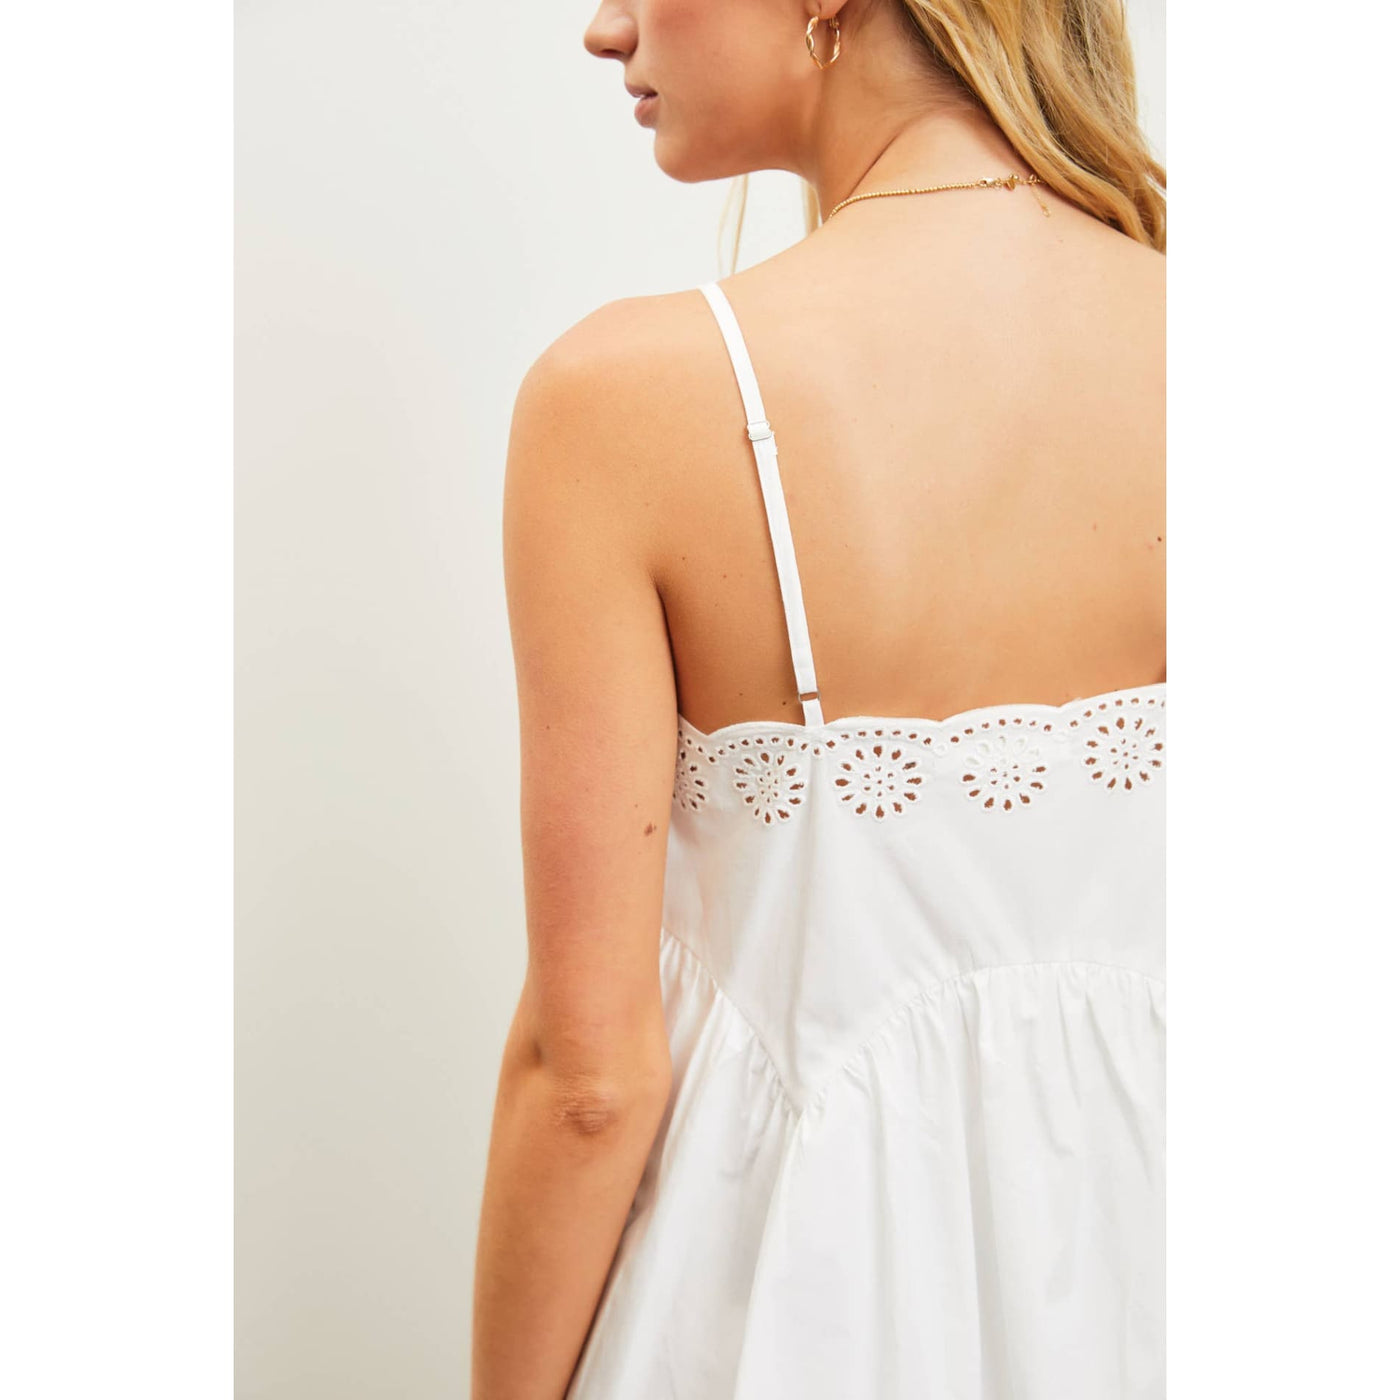 One Sweet Day Mini Dress - S / White 170 Casual Dresses/Jumpsuits/Rompers